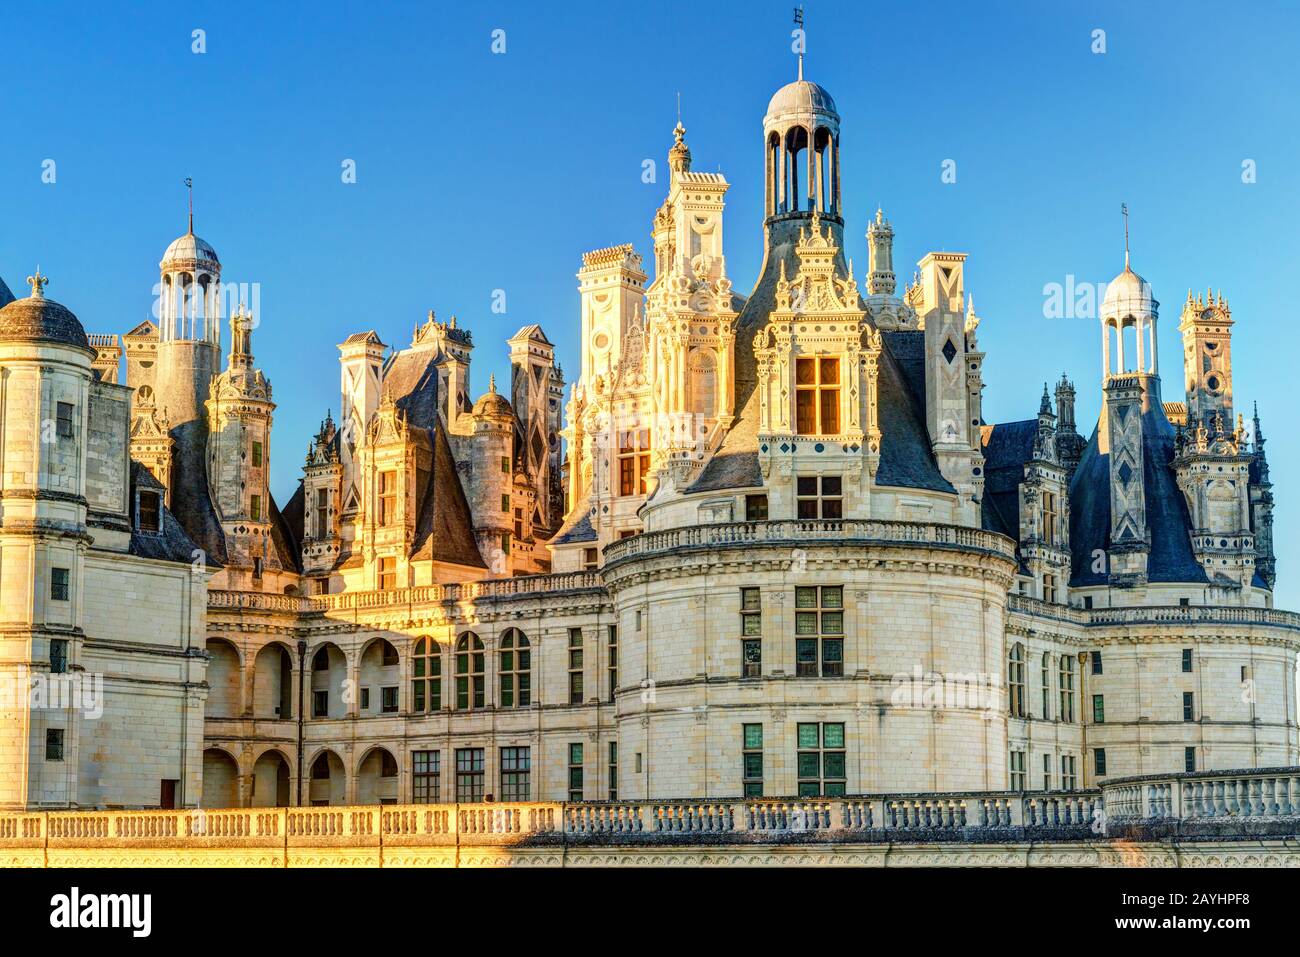 The royal Chateau de Chambord, France. This castle is located in the Loire Valley, was built in the 16th century and is one of the most recognizable c Stock Photo